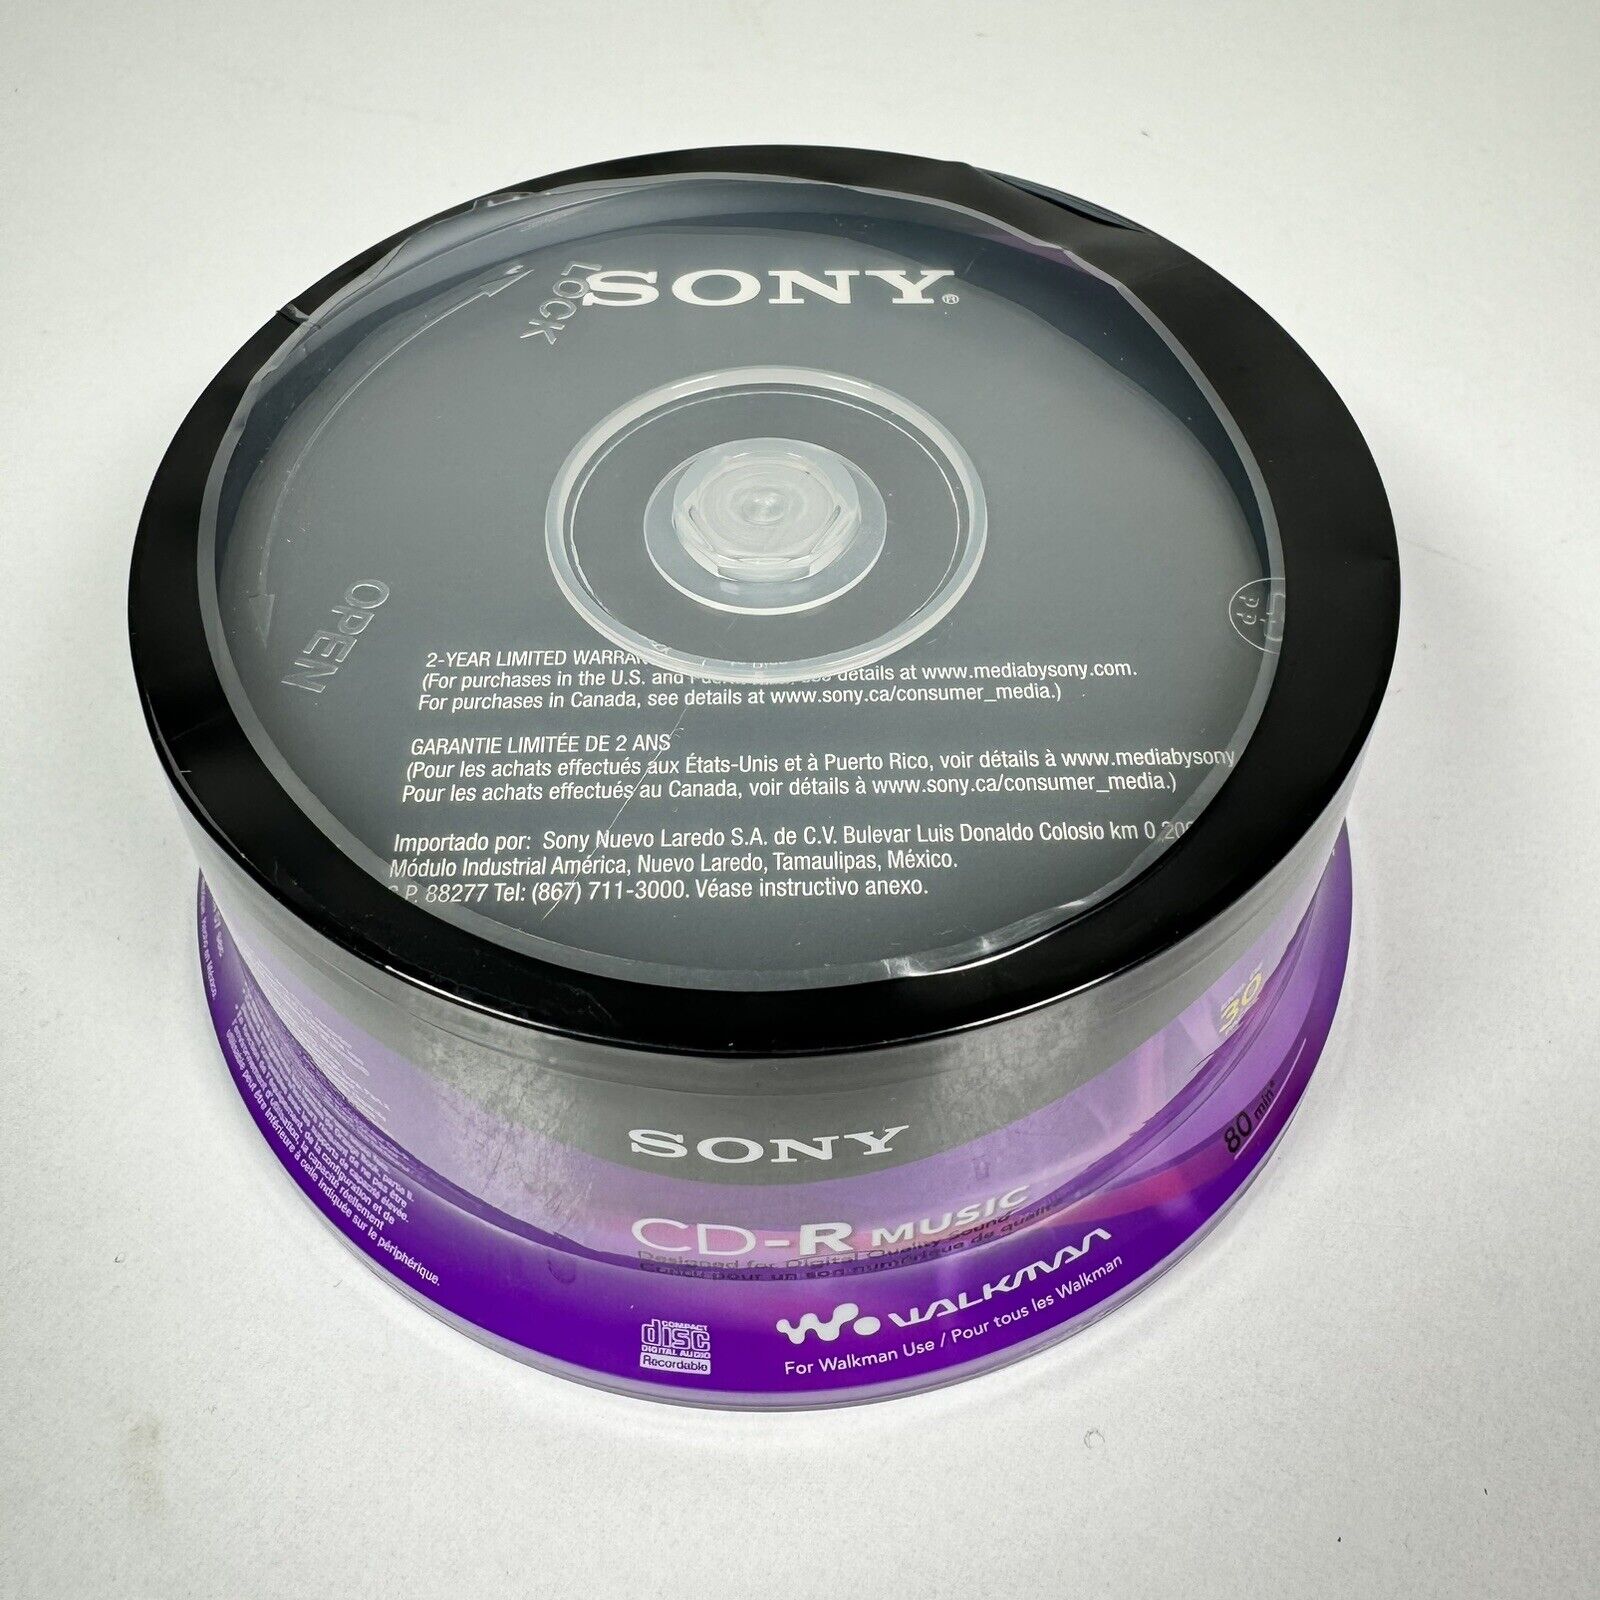 Sony CD-R Music 30 Pack For Walkman 80 Min Disc Recordable CD Sealed New